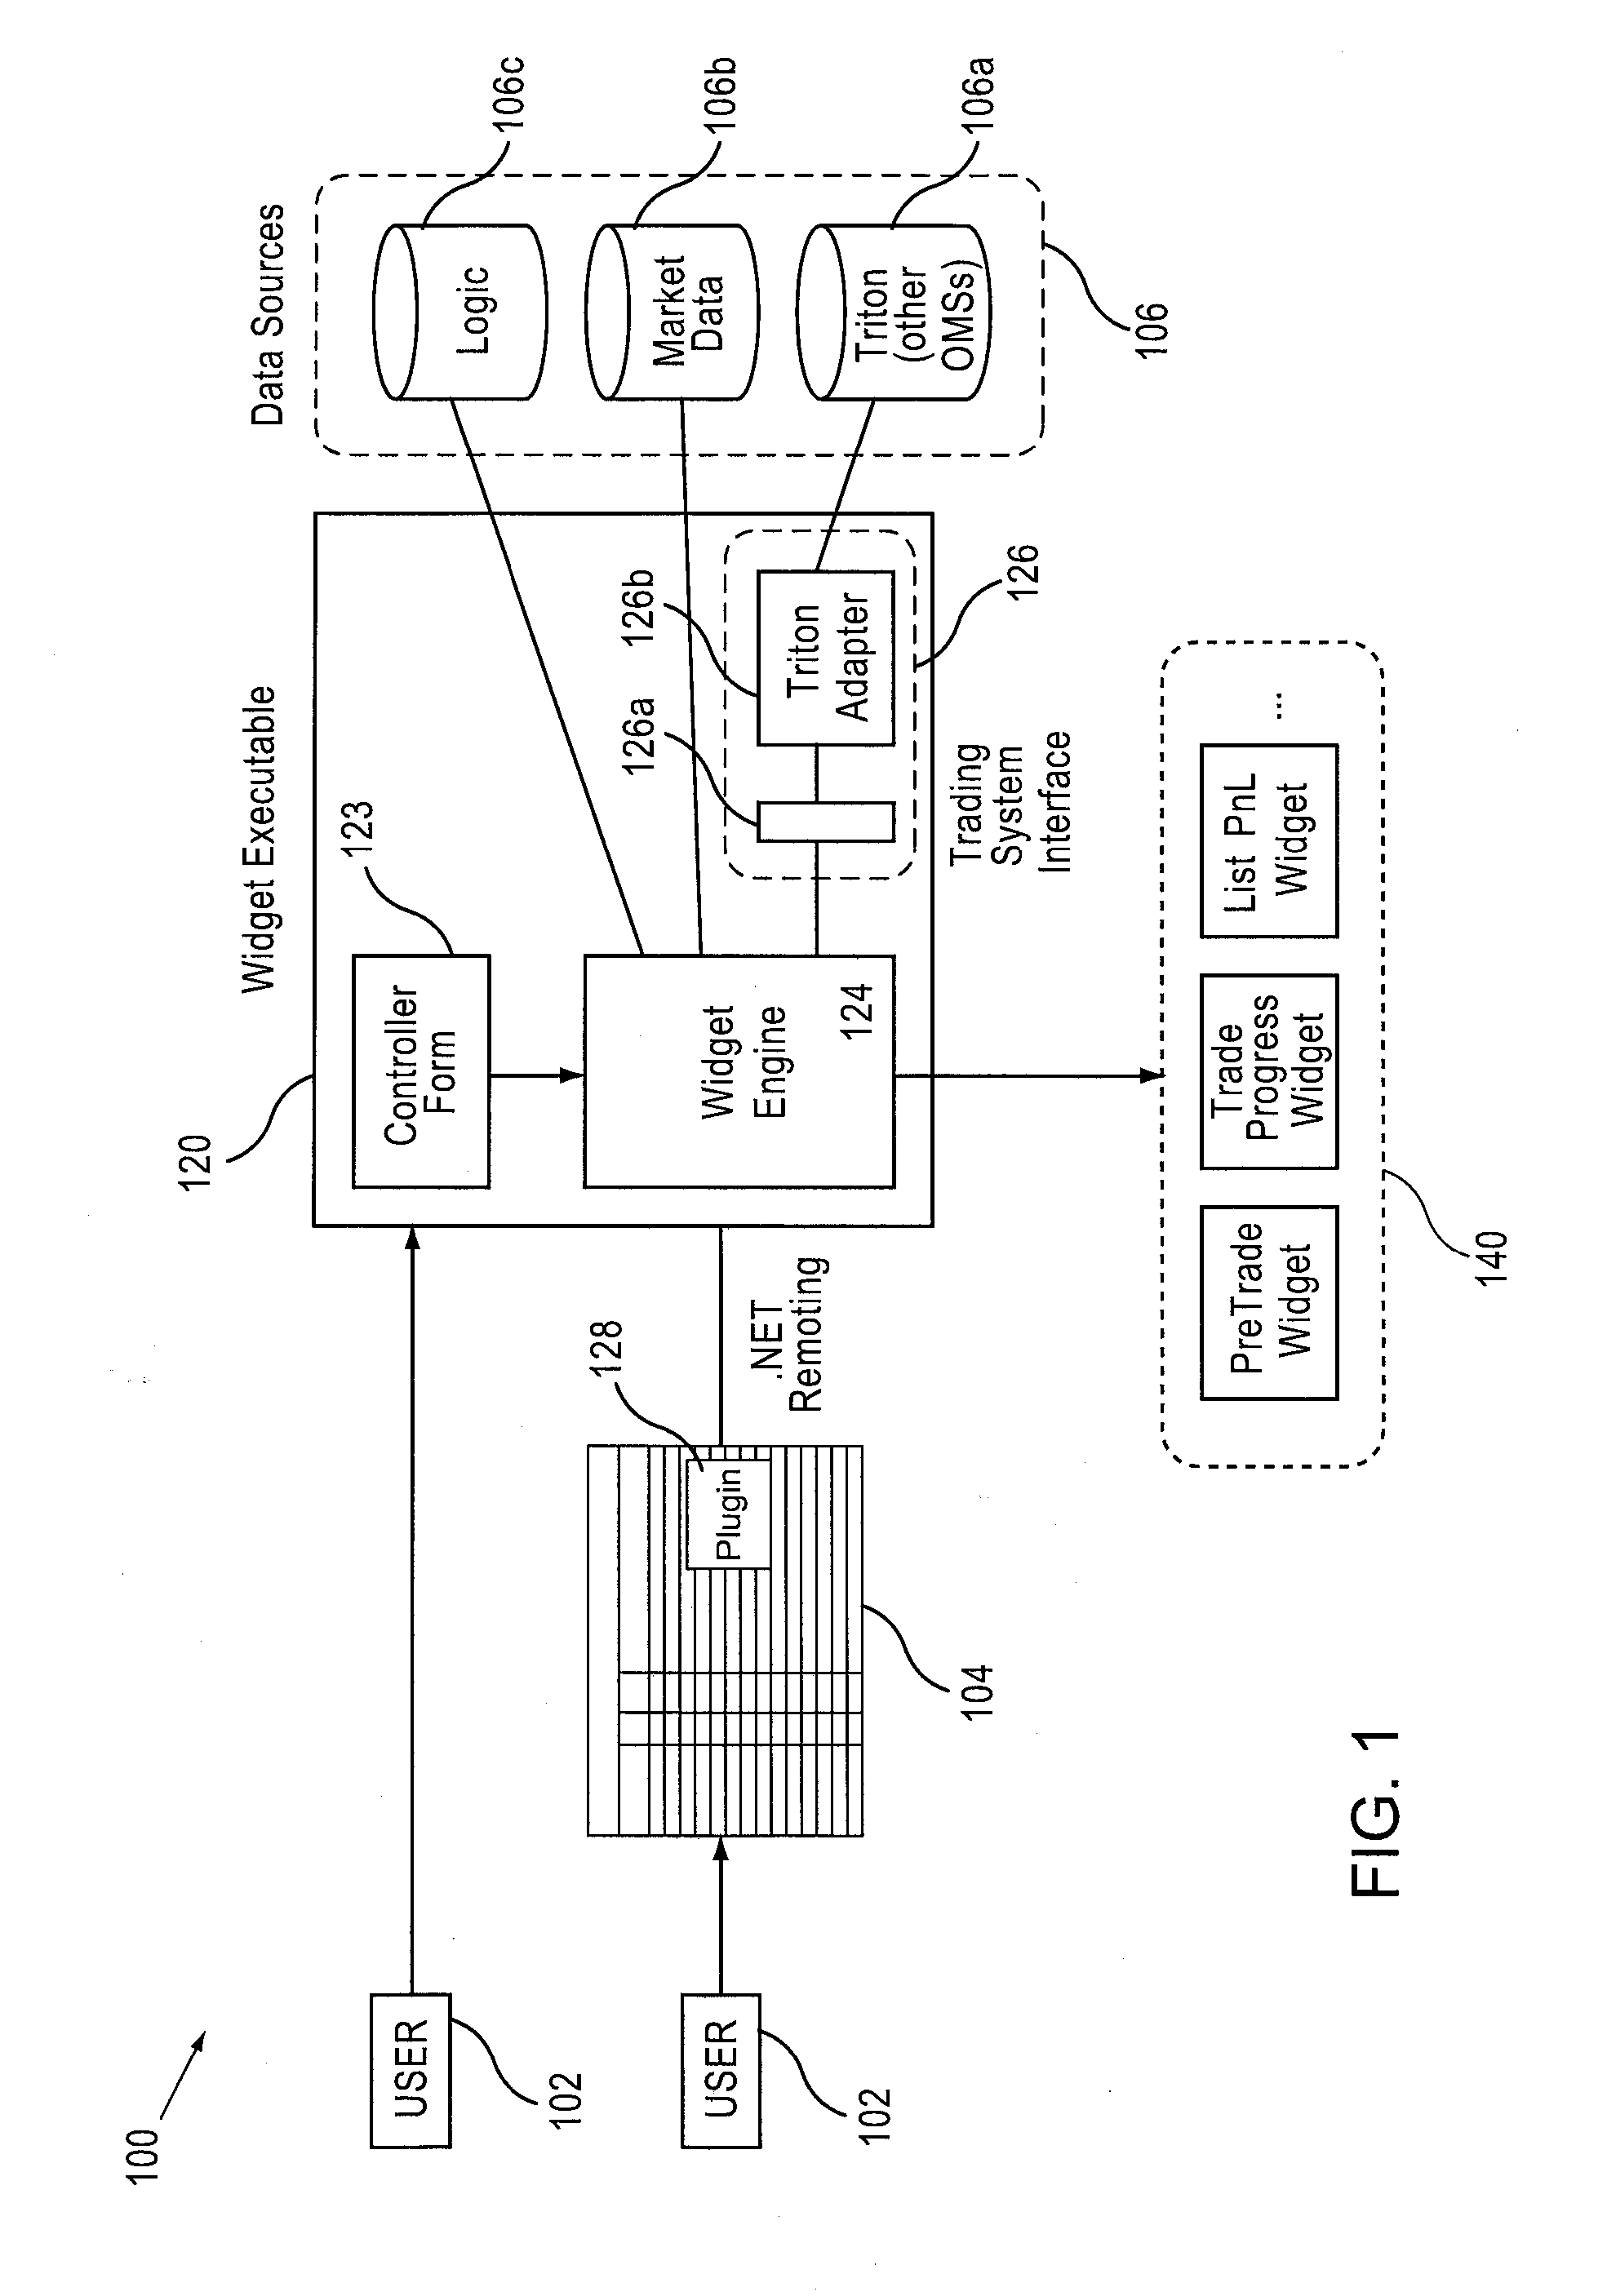 Systems, methods, and computer program products for providing real time analytic widgets in a financial trading system